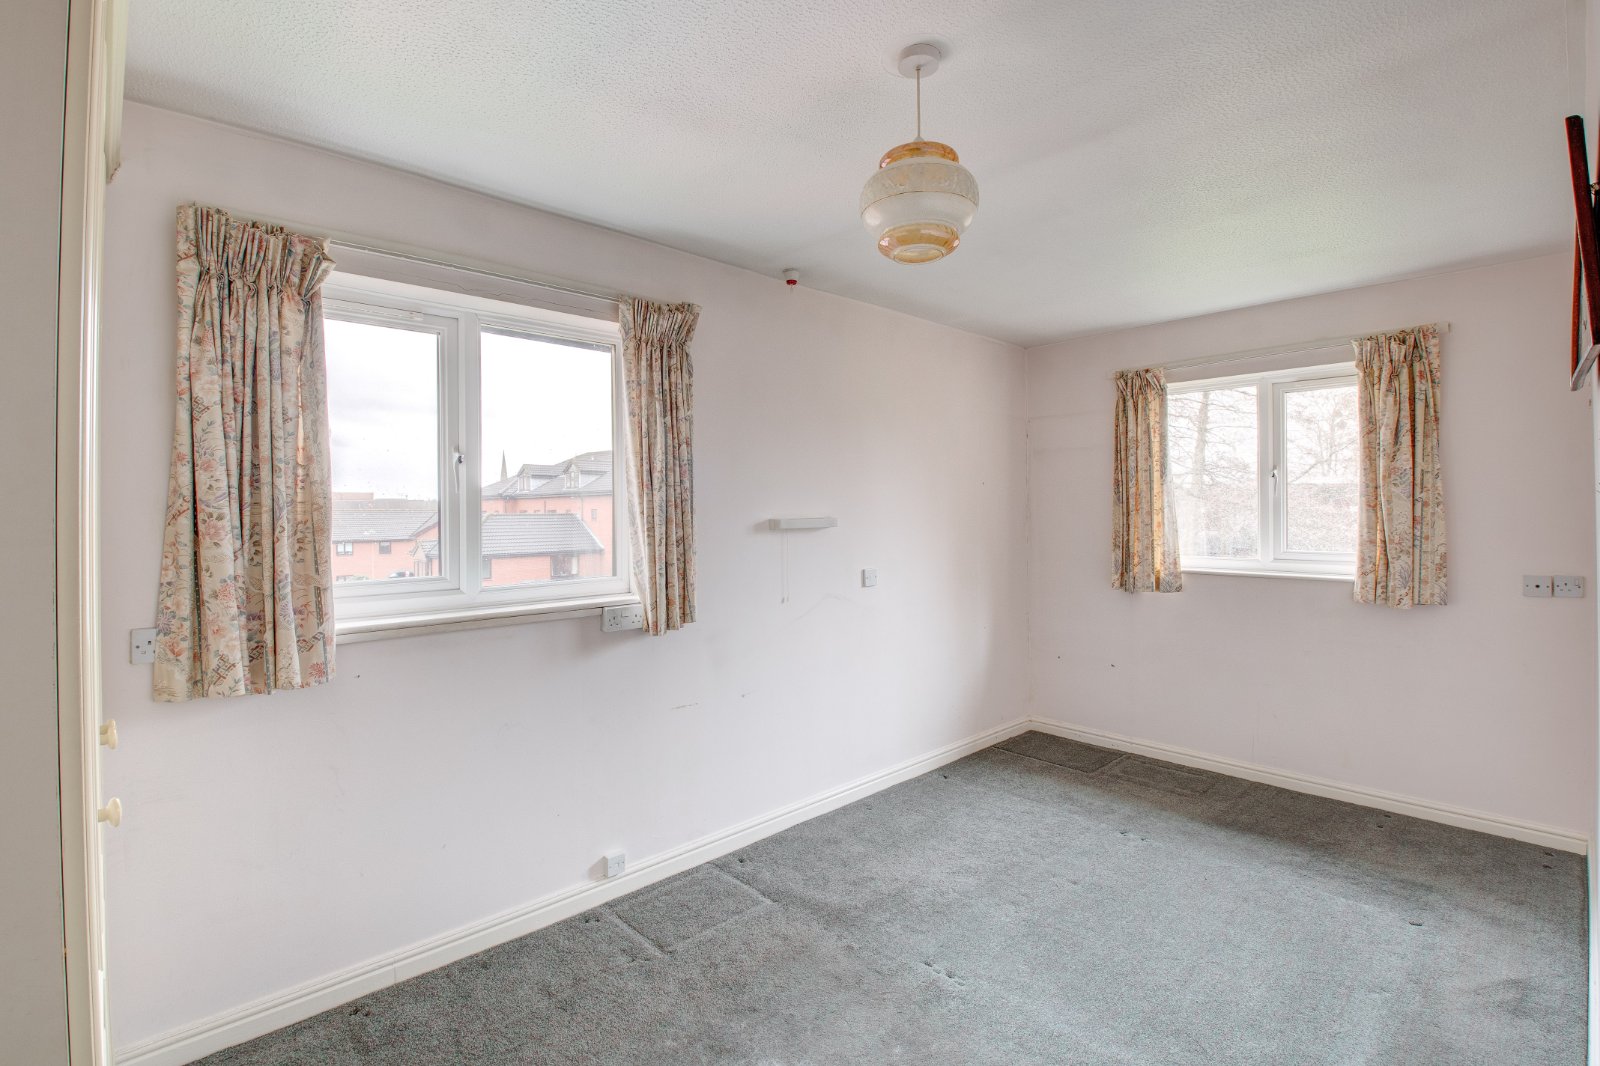 1 bed  for sale in Housman Park, Bromsgrove 7